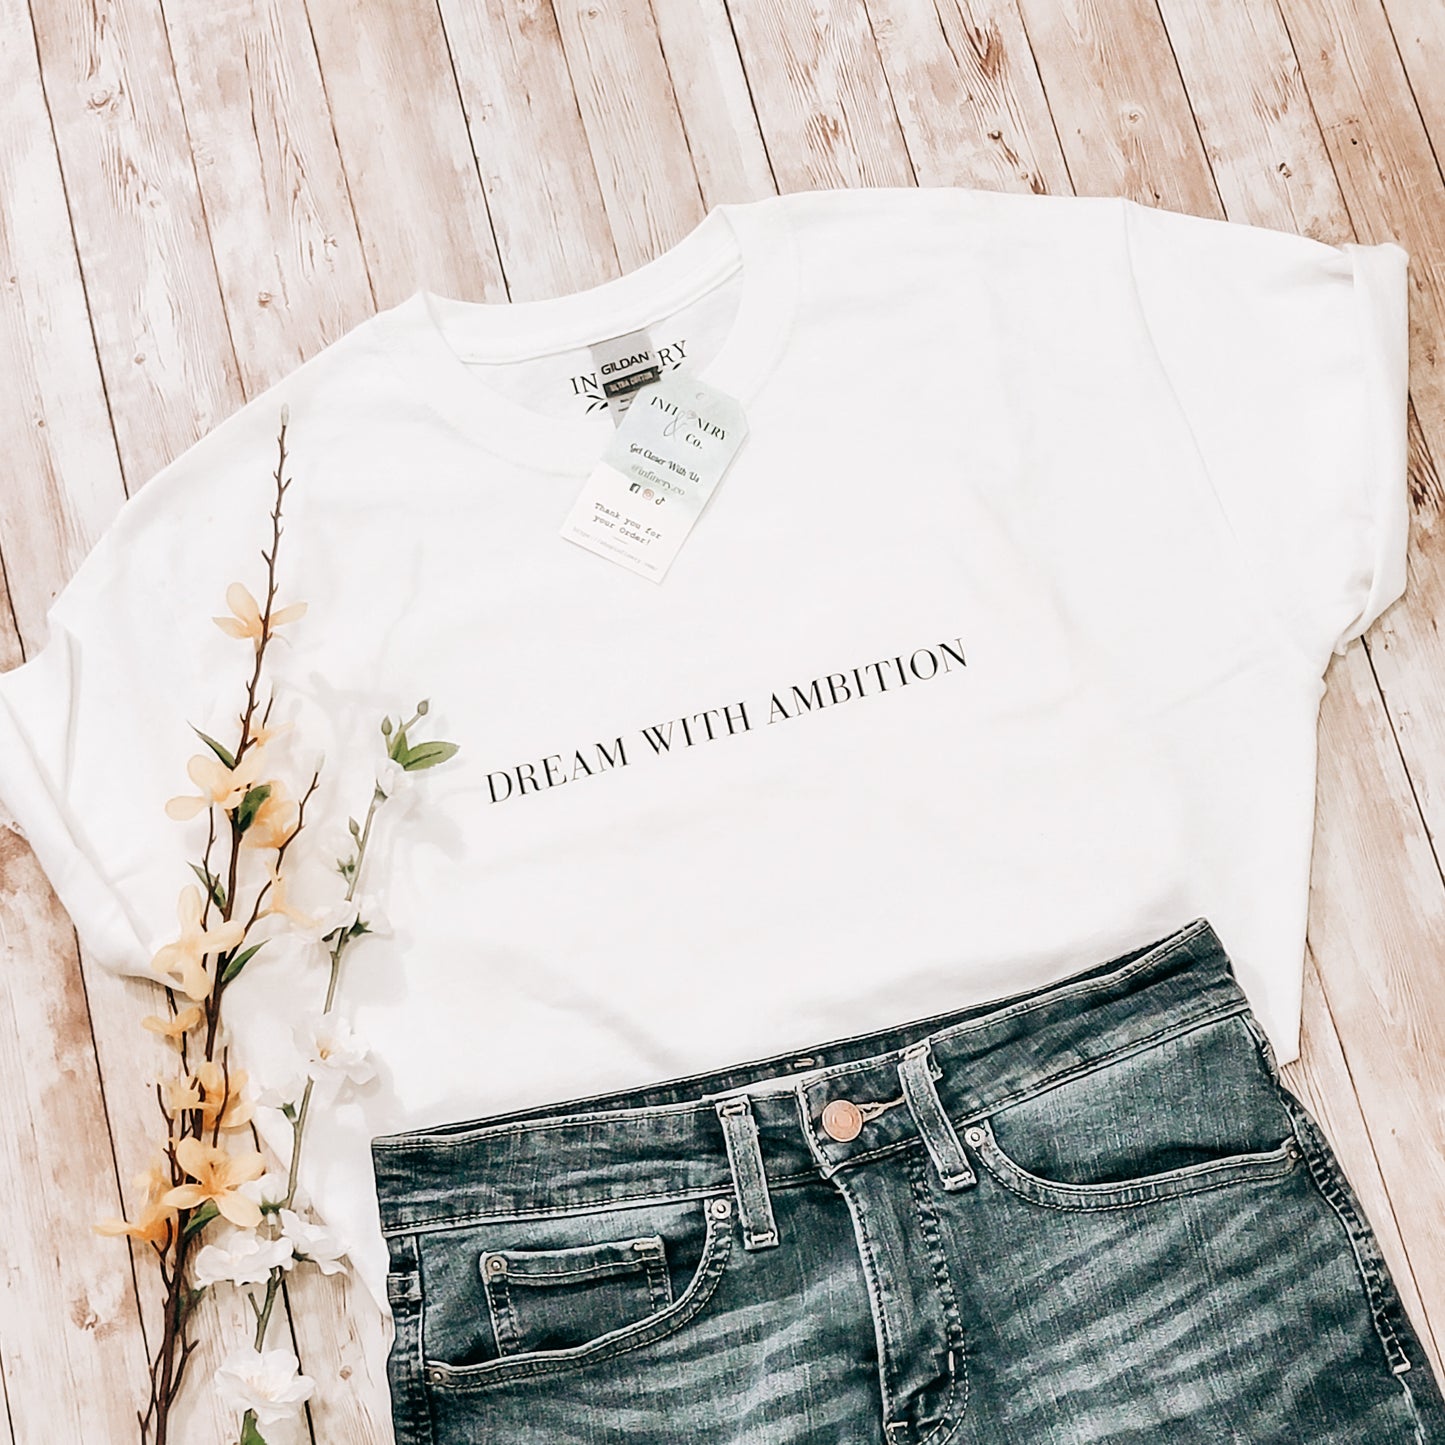 Dream with Ambition - T-Shirt